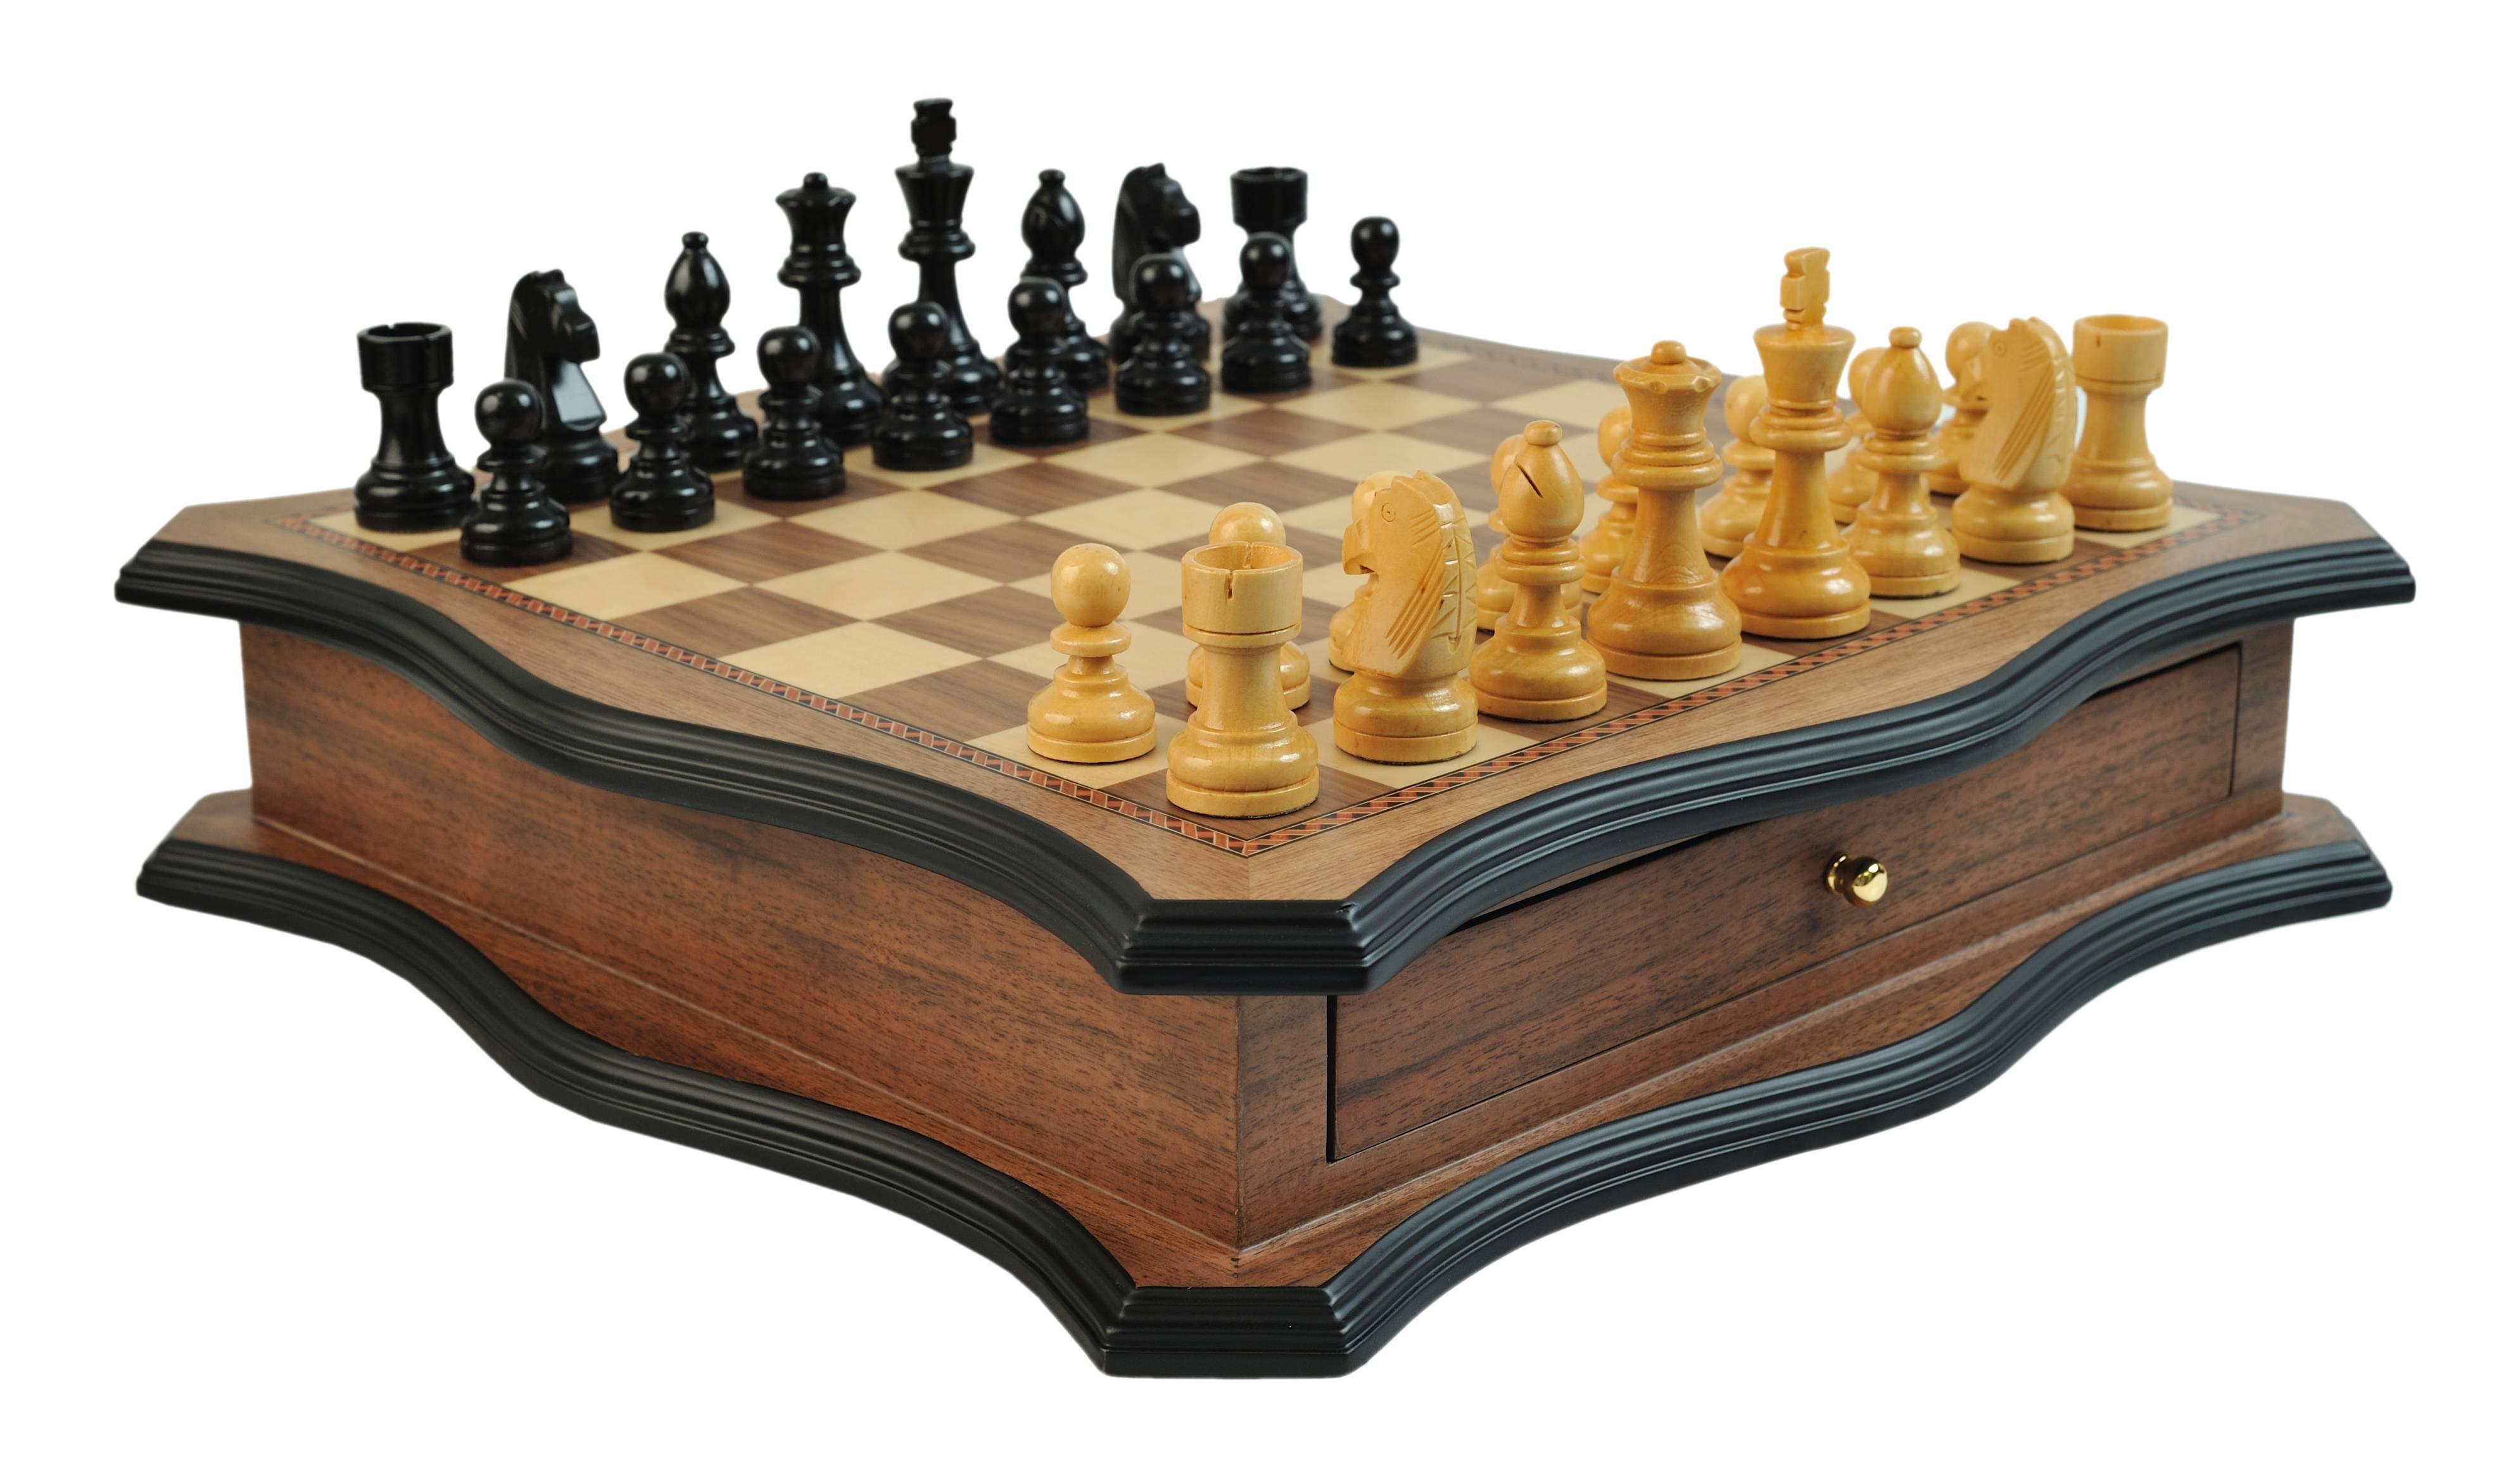 CARYALL CHESS BAG TOURNAMENT PIECES 2 QUEENS BOARD SET